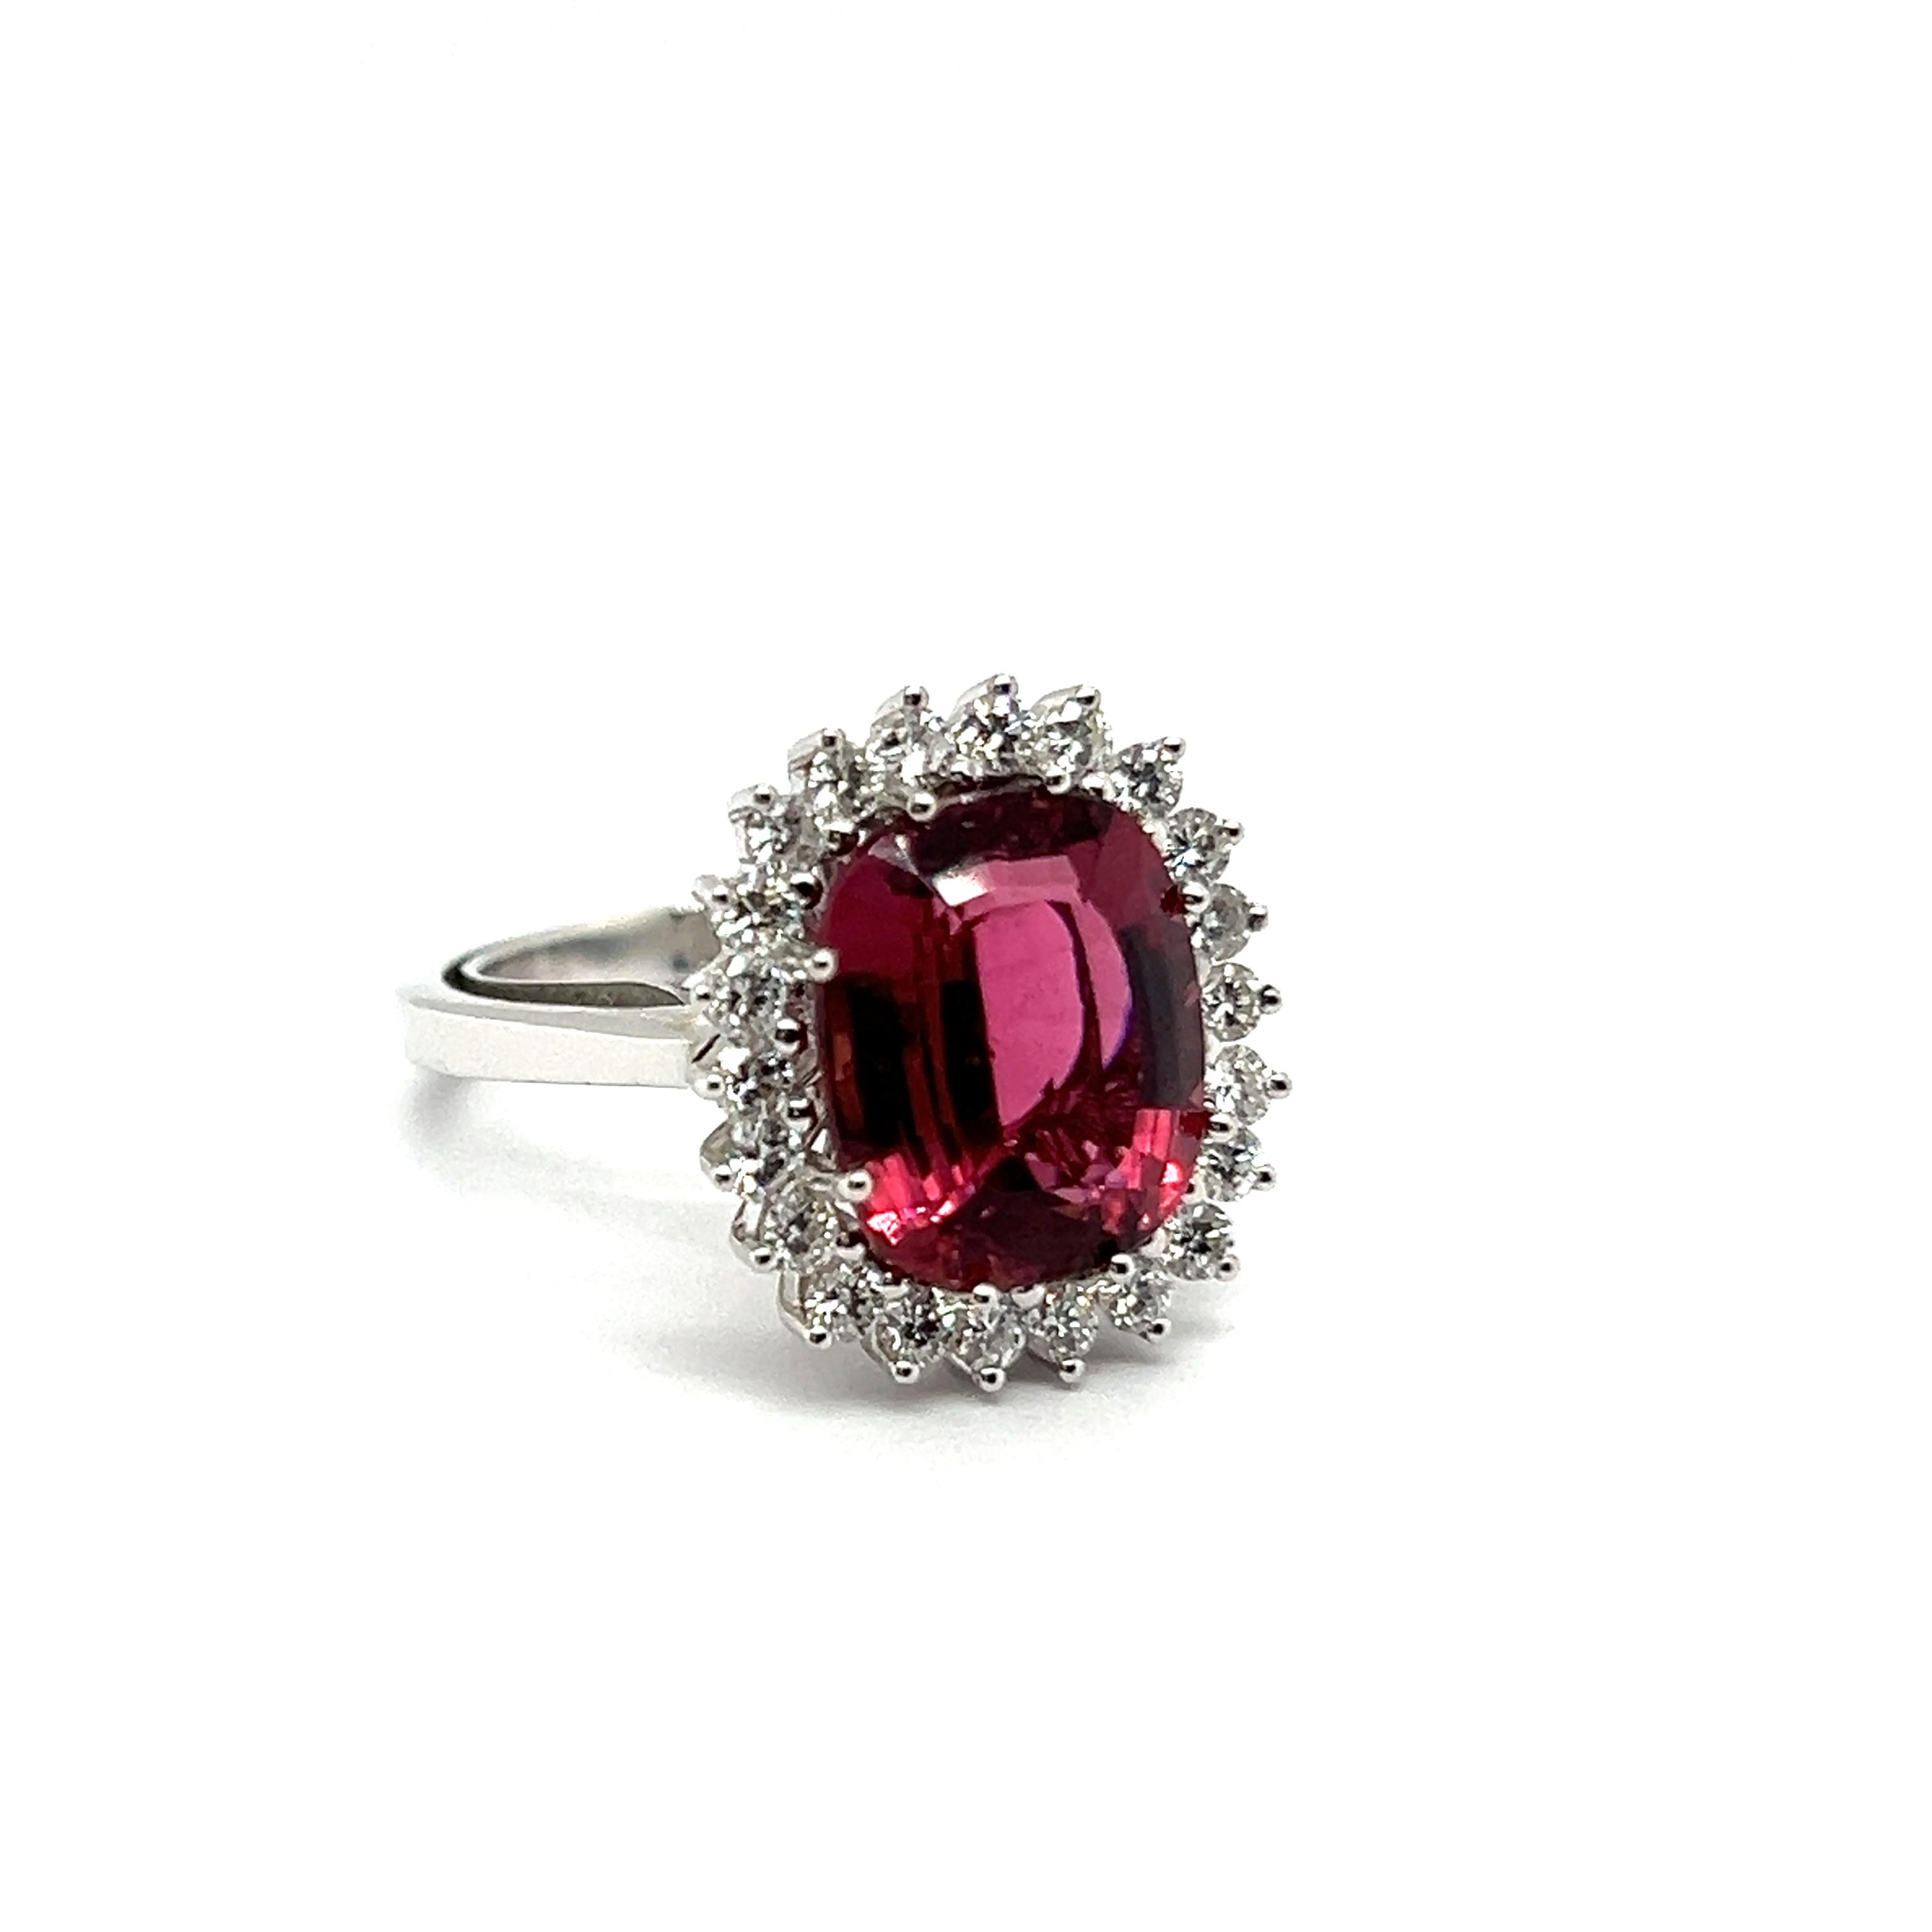  Cocktail Ring with Pink Tourmaline & Diamond in 18 Karat White Gold For Sale 2